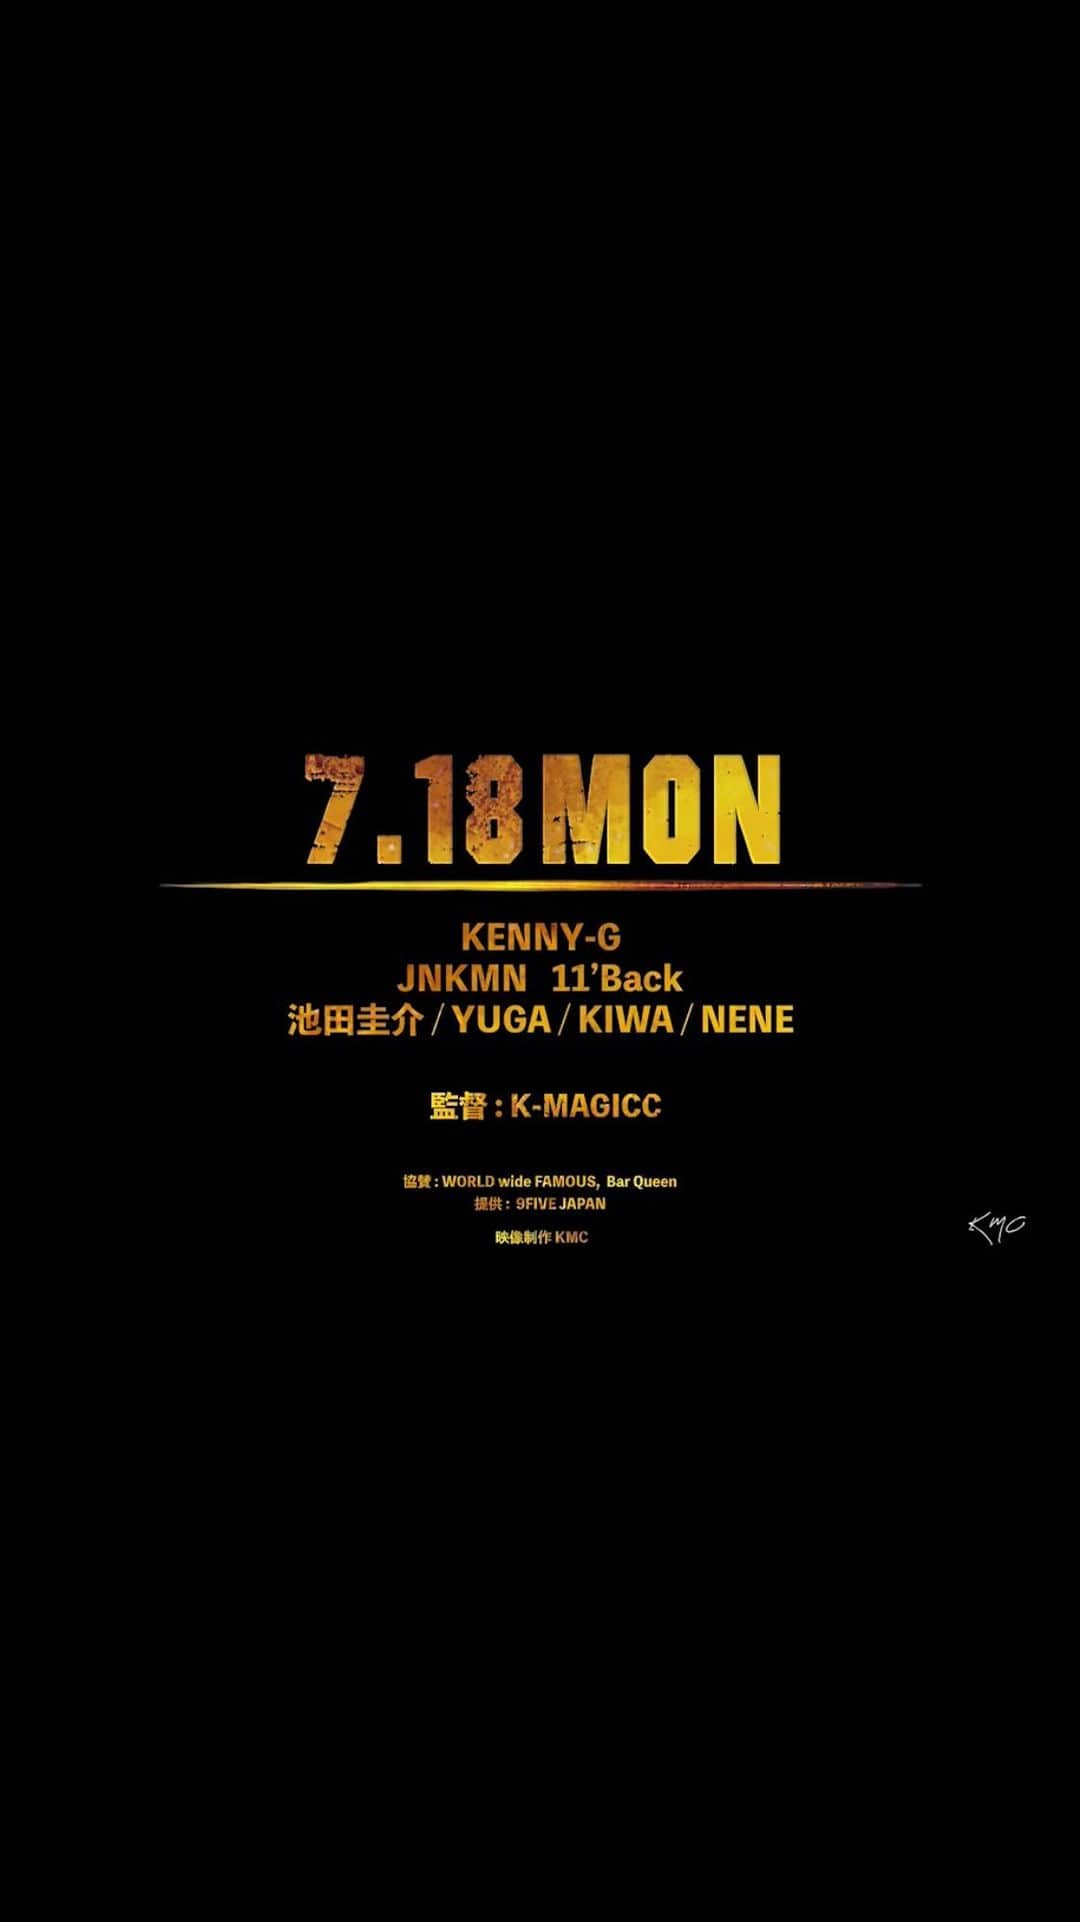 KENNY-Gのインスタグラム：「7.18 (MON) 20時公開 EMOTION - KENNY-G (official music video)  Dir @kmagicc  @world_wide_famous  @9five_japan  @queen_ozaku   #kennyg #kennessy #3ballzrecord #musicvideo」